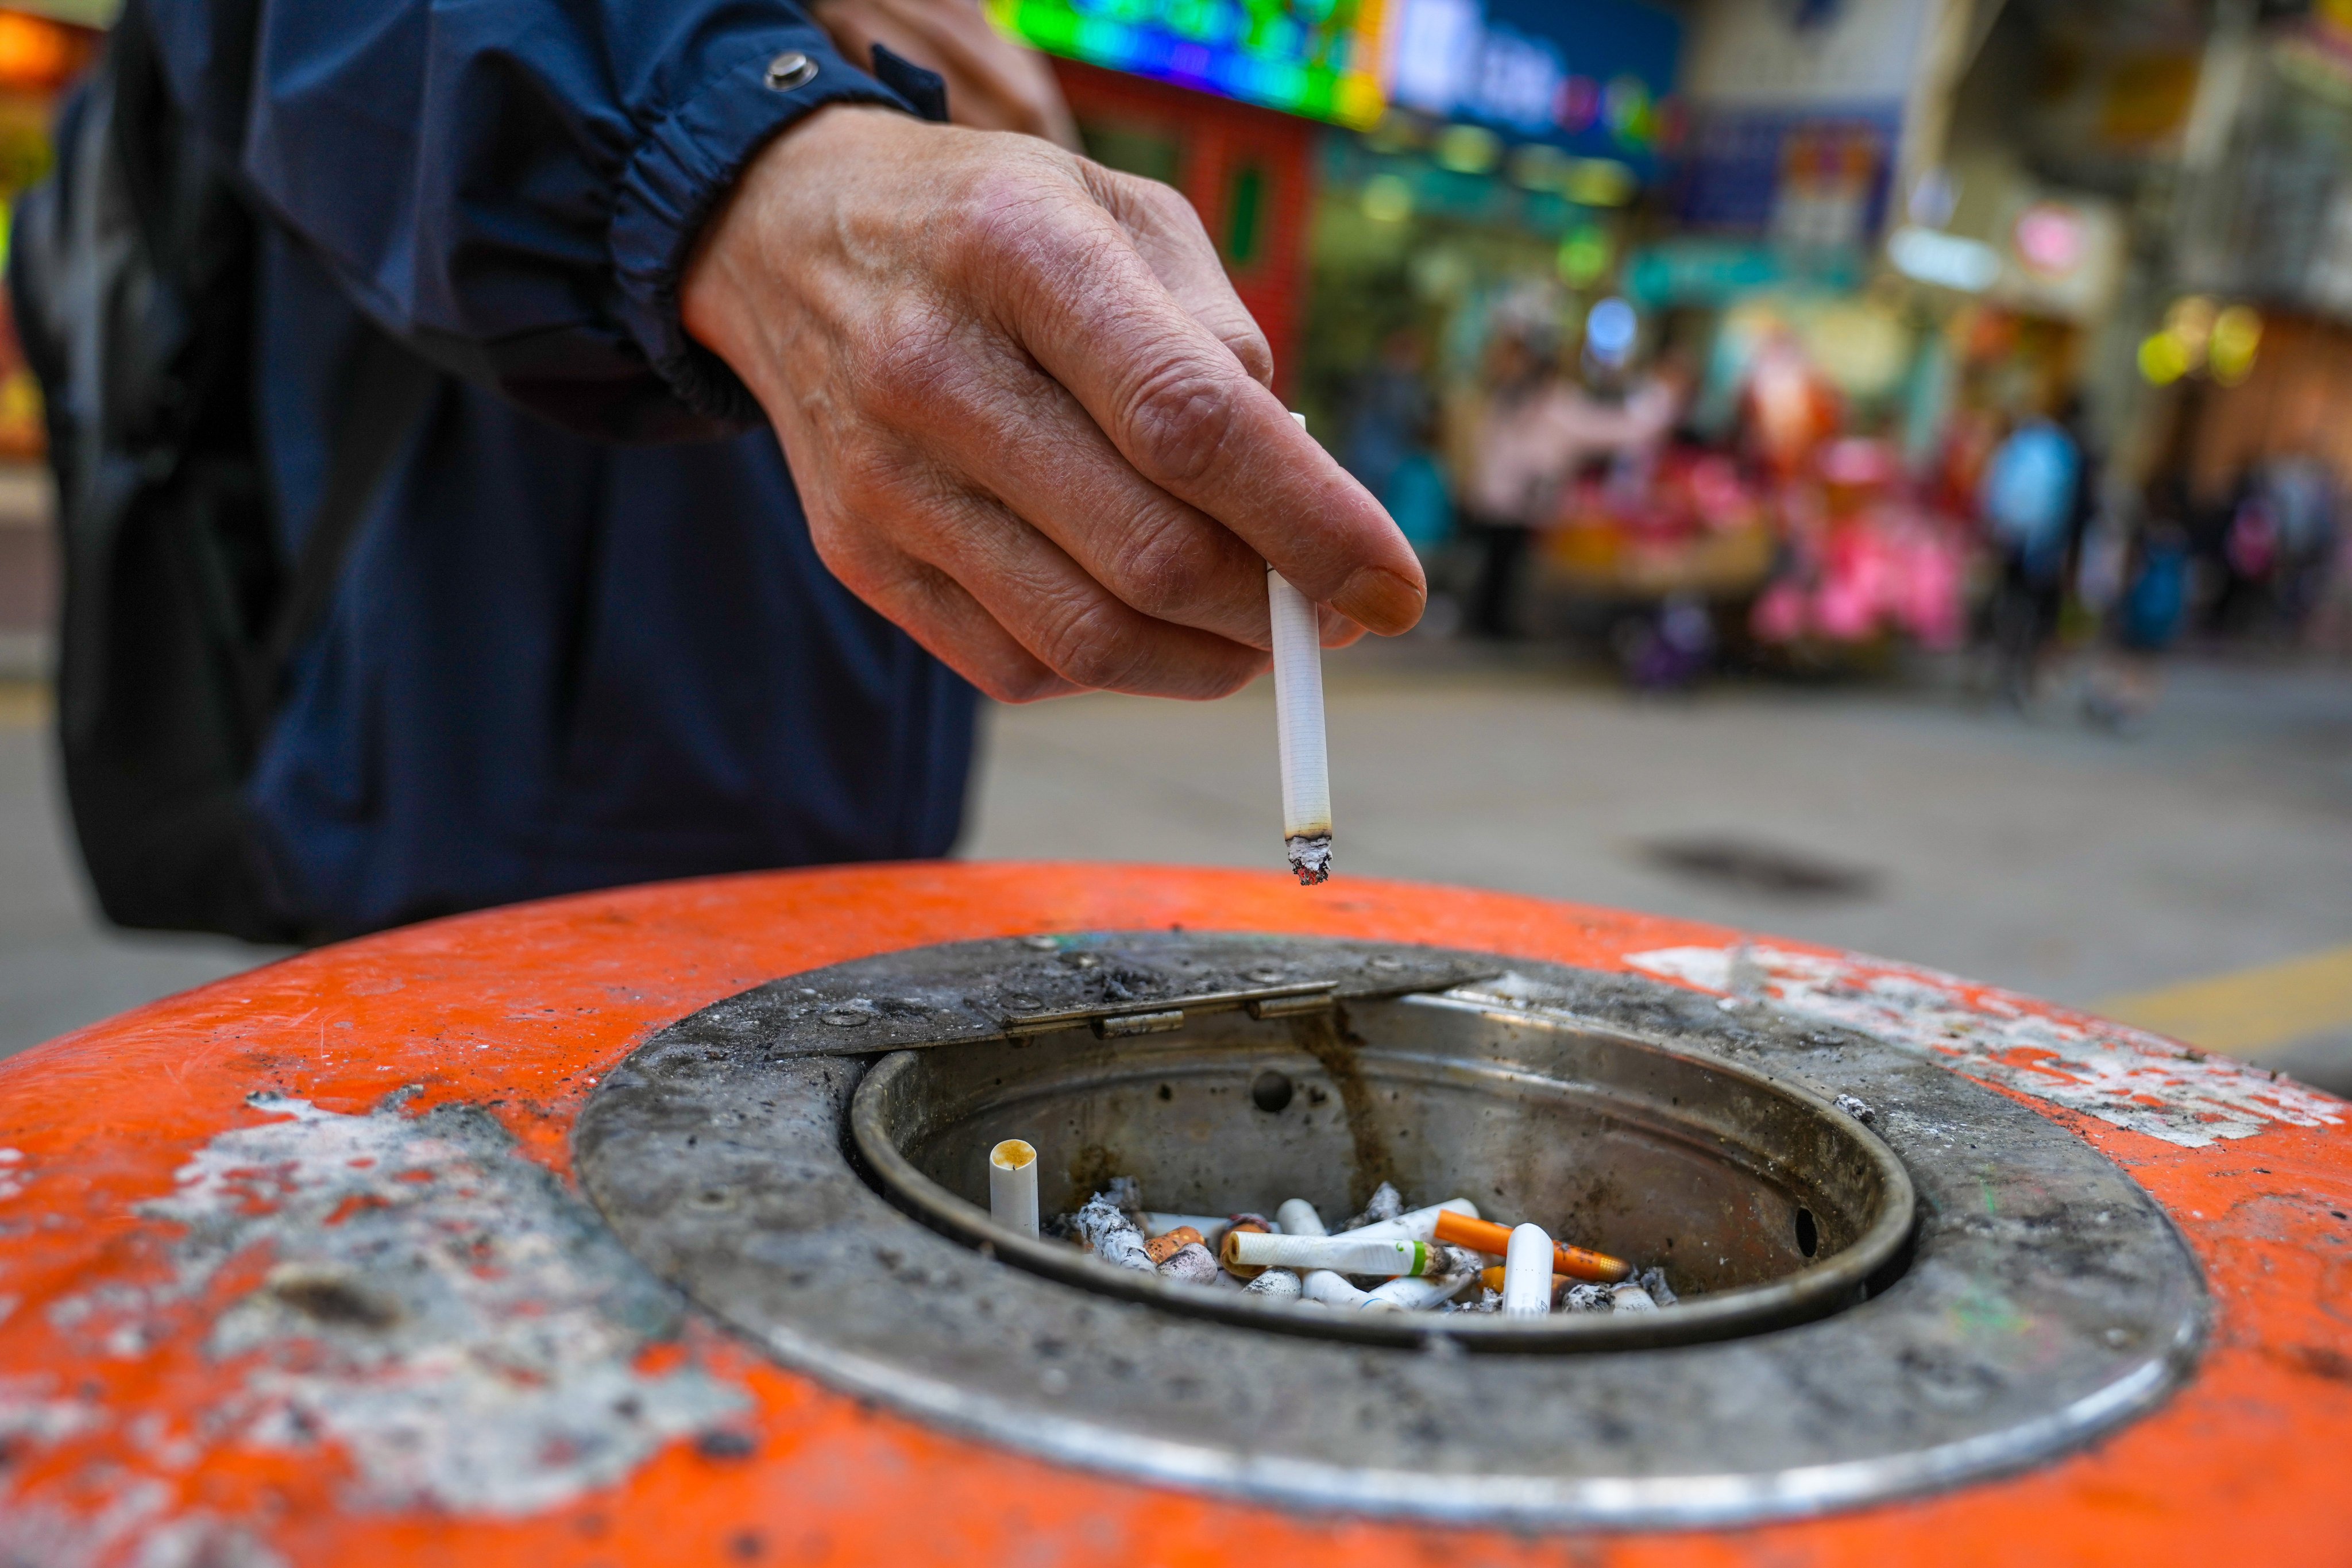 Tobacco and alcohol control officials have launched a clampdown on illegal activity linked to smoking. Photo: Sam Tsang